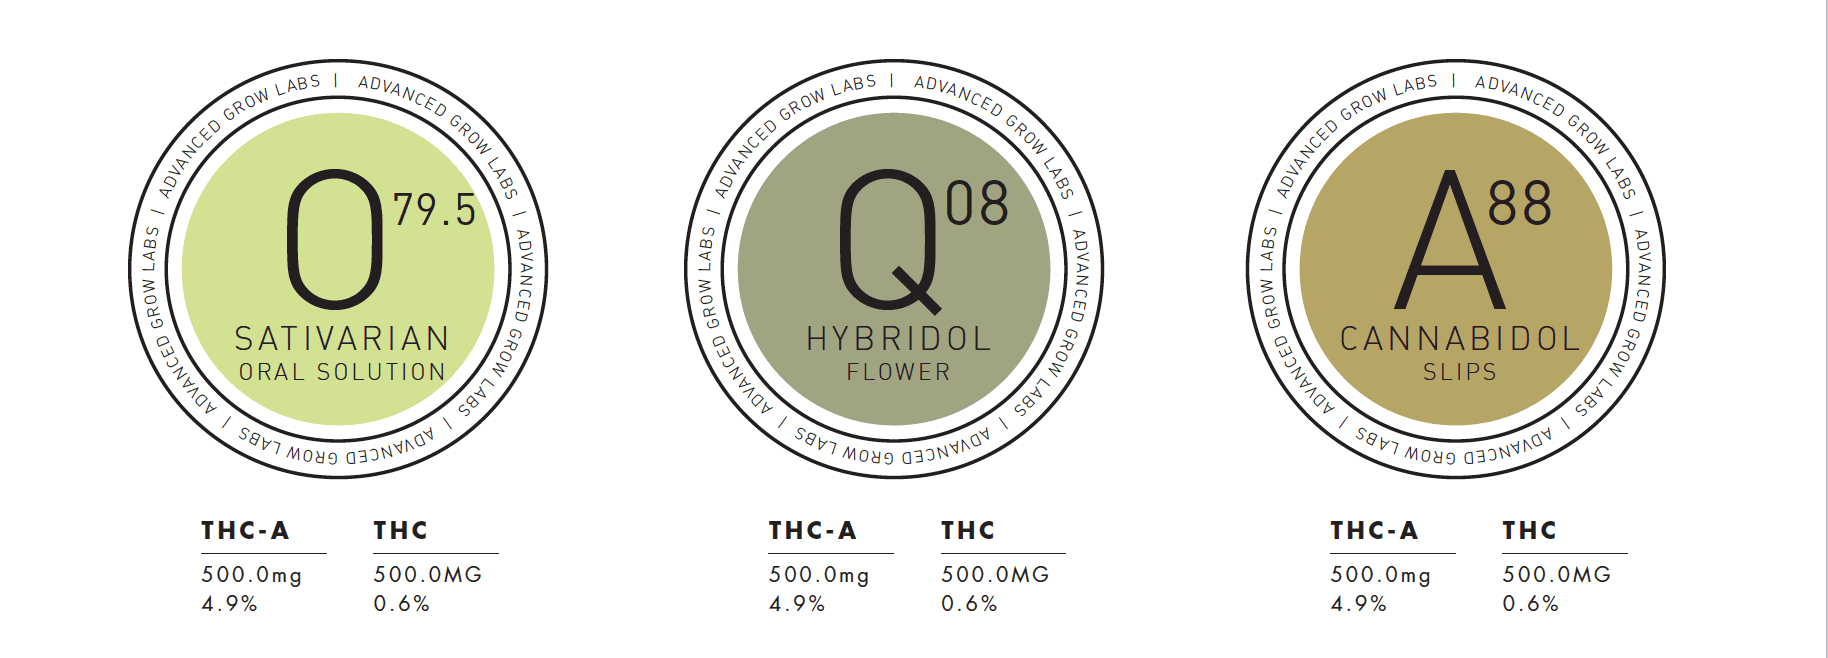 A label for the thc and cbd flower.